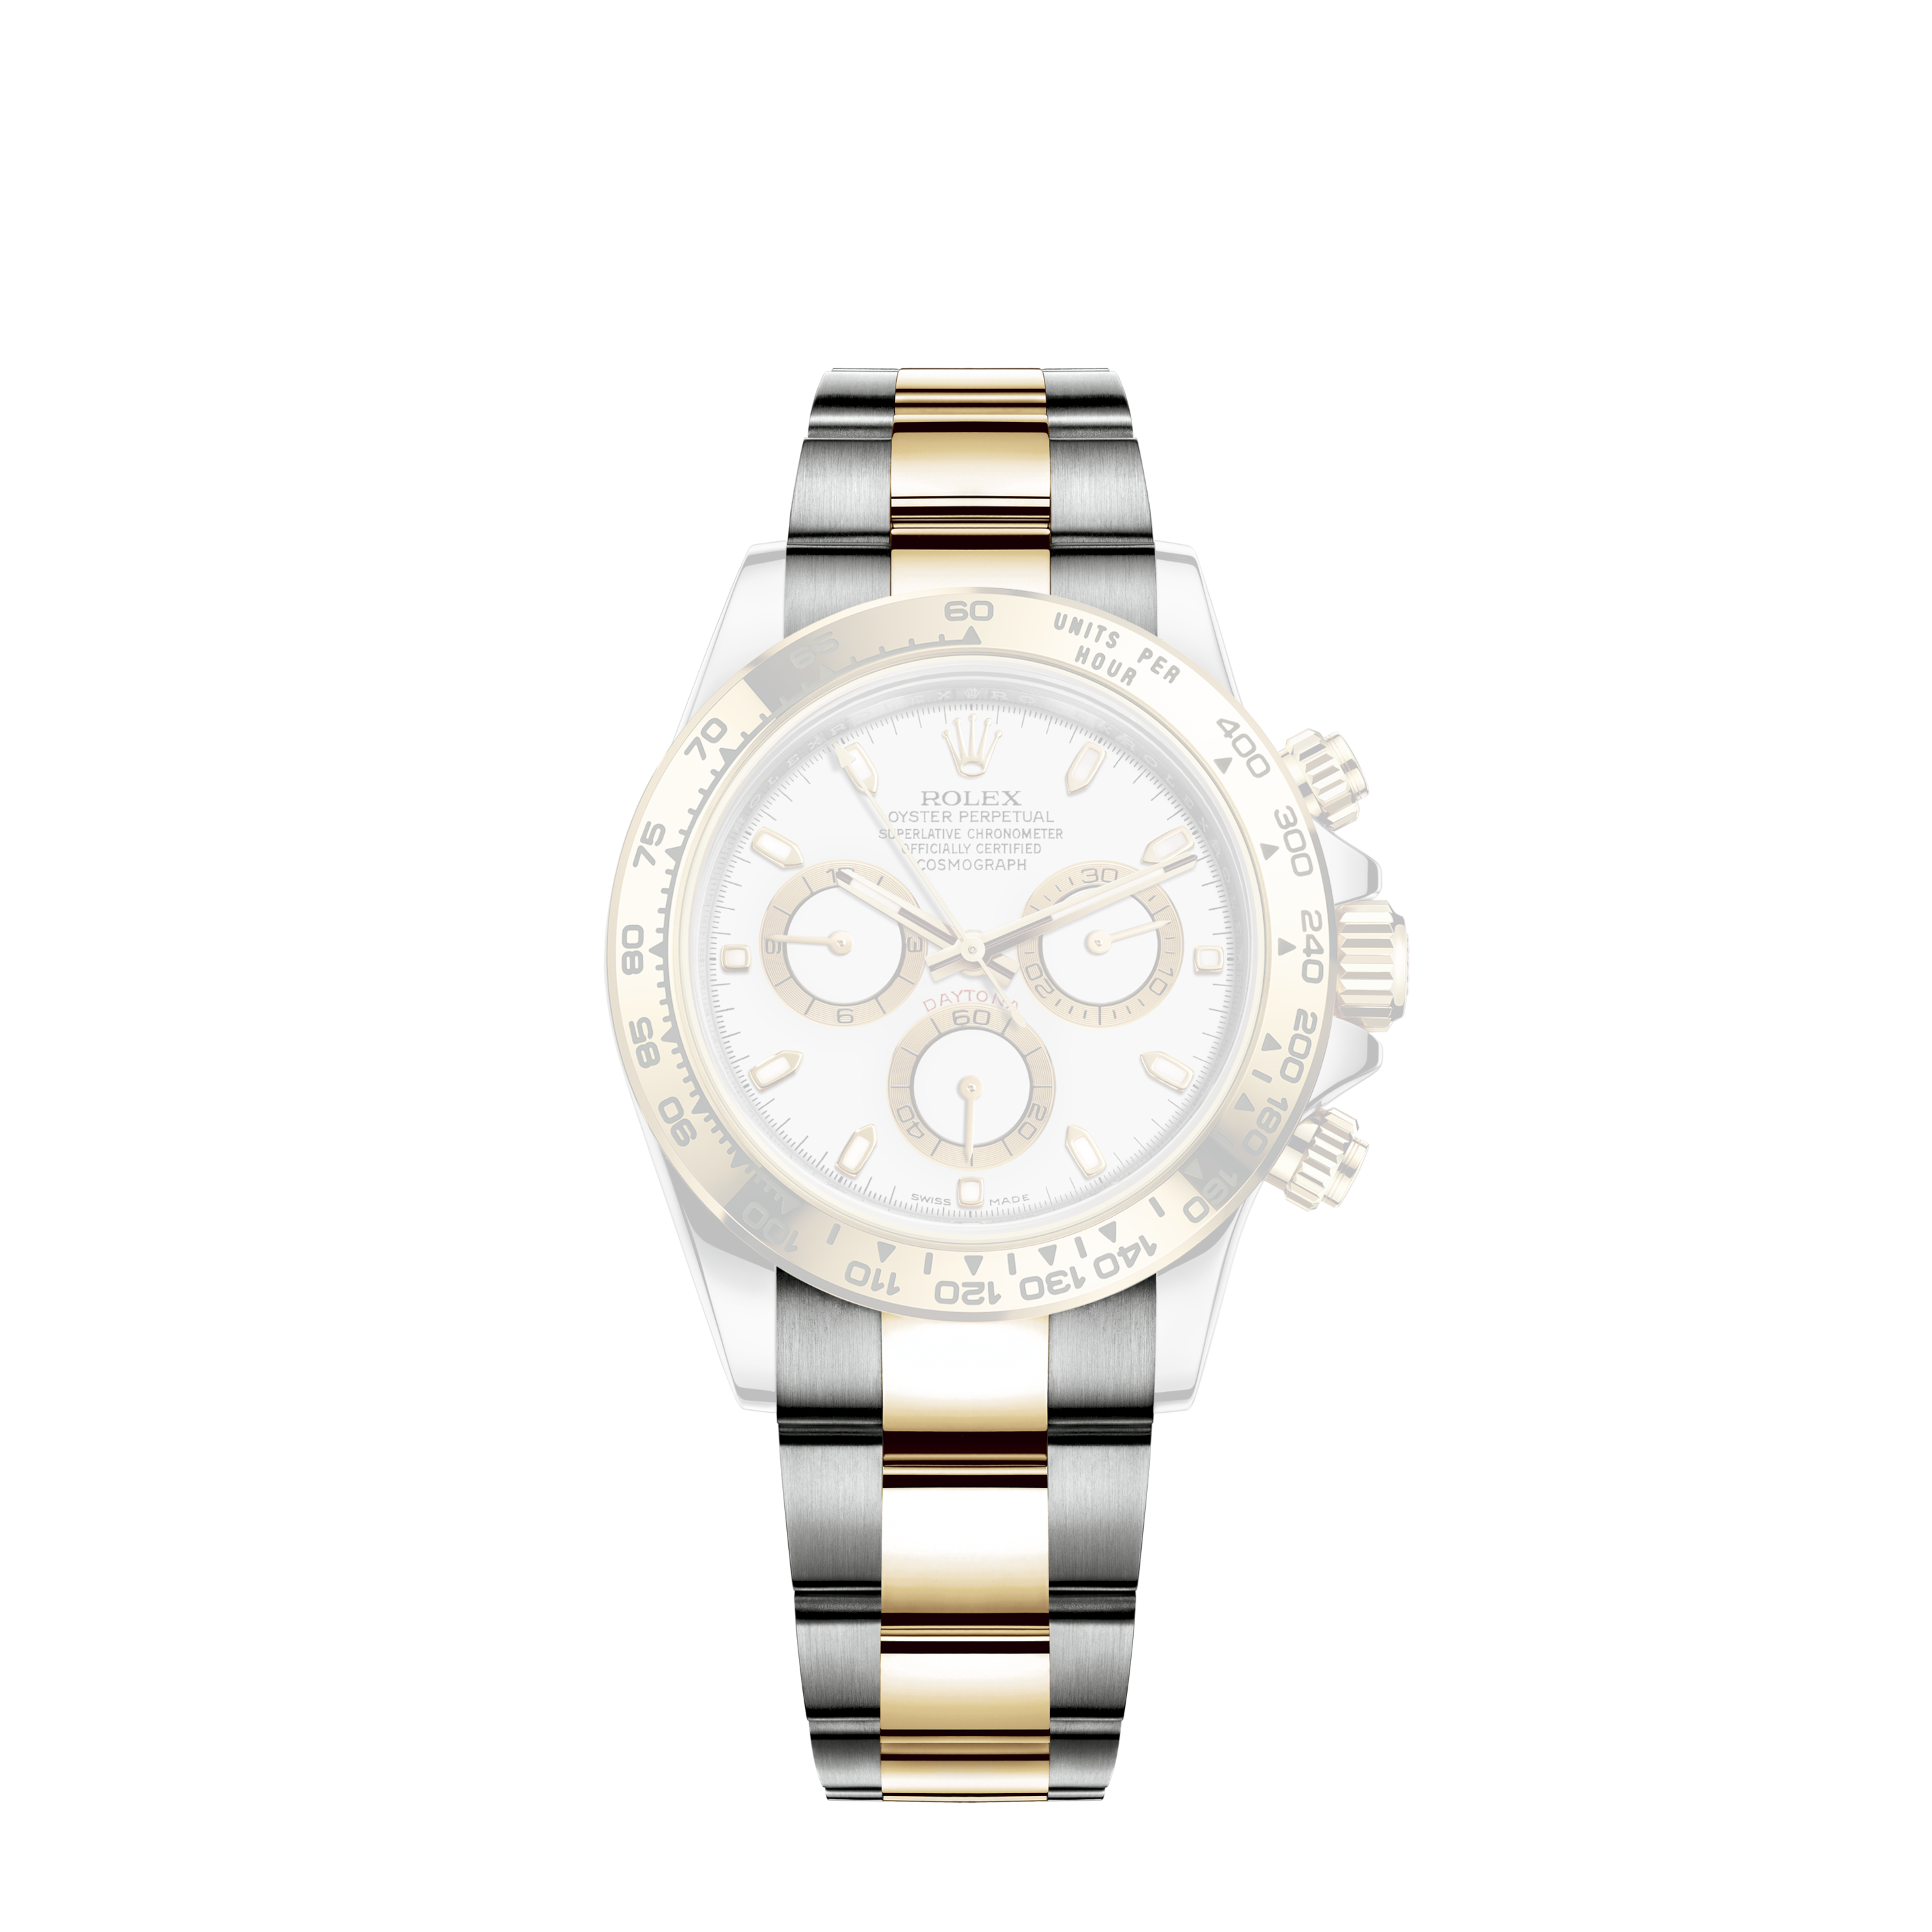 Rolex Datejust 69173 Tapestry Dial Ladies Watch